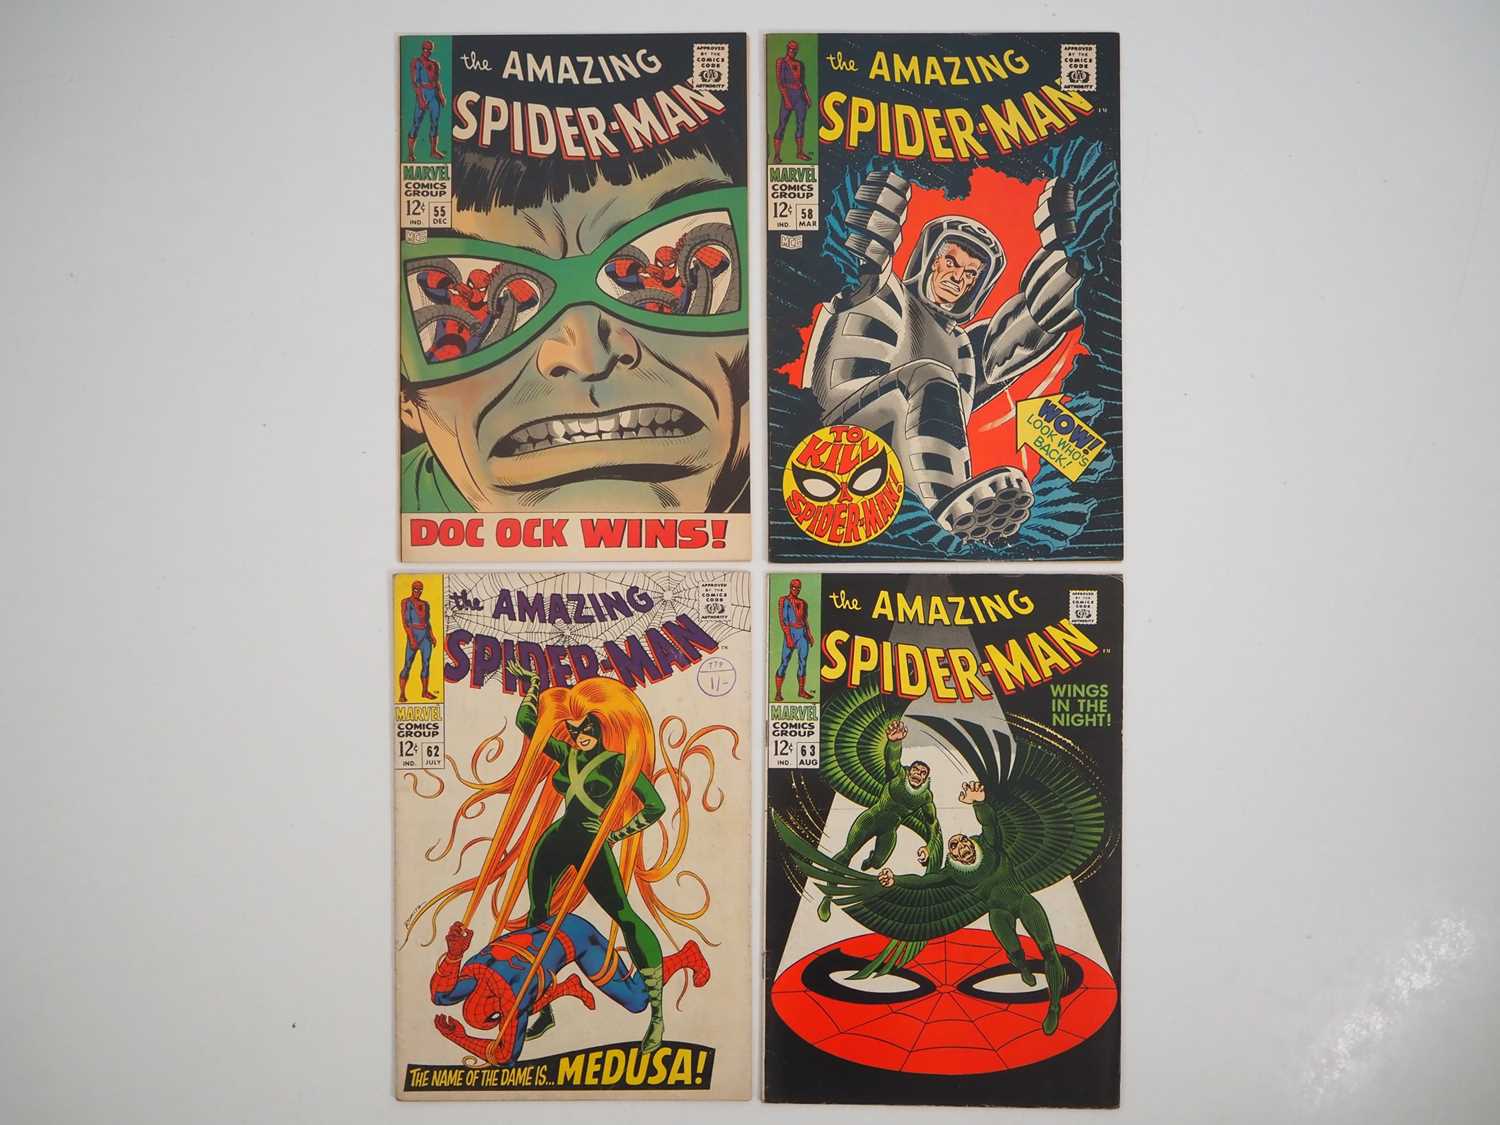 AMAZING SPIDER-MAN #55, 58, 62, 63 (4 in Lot) - (1967/1968 - MARVEL) - Includes classic cover art by